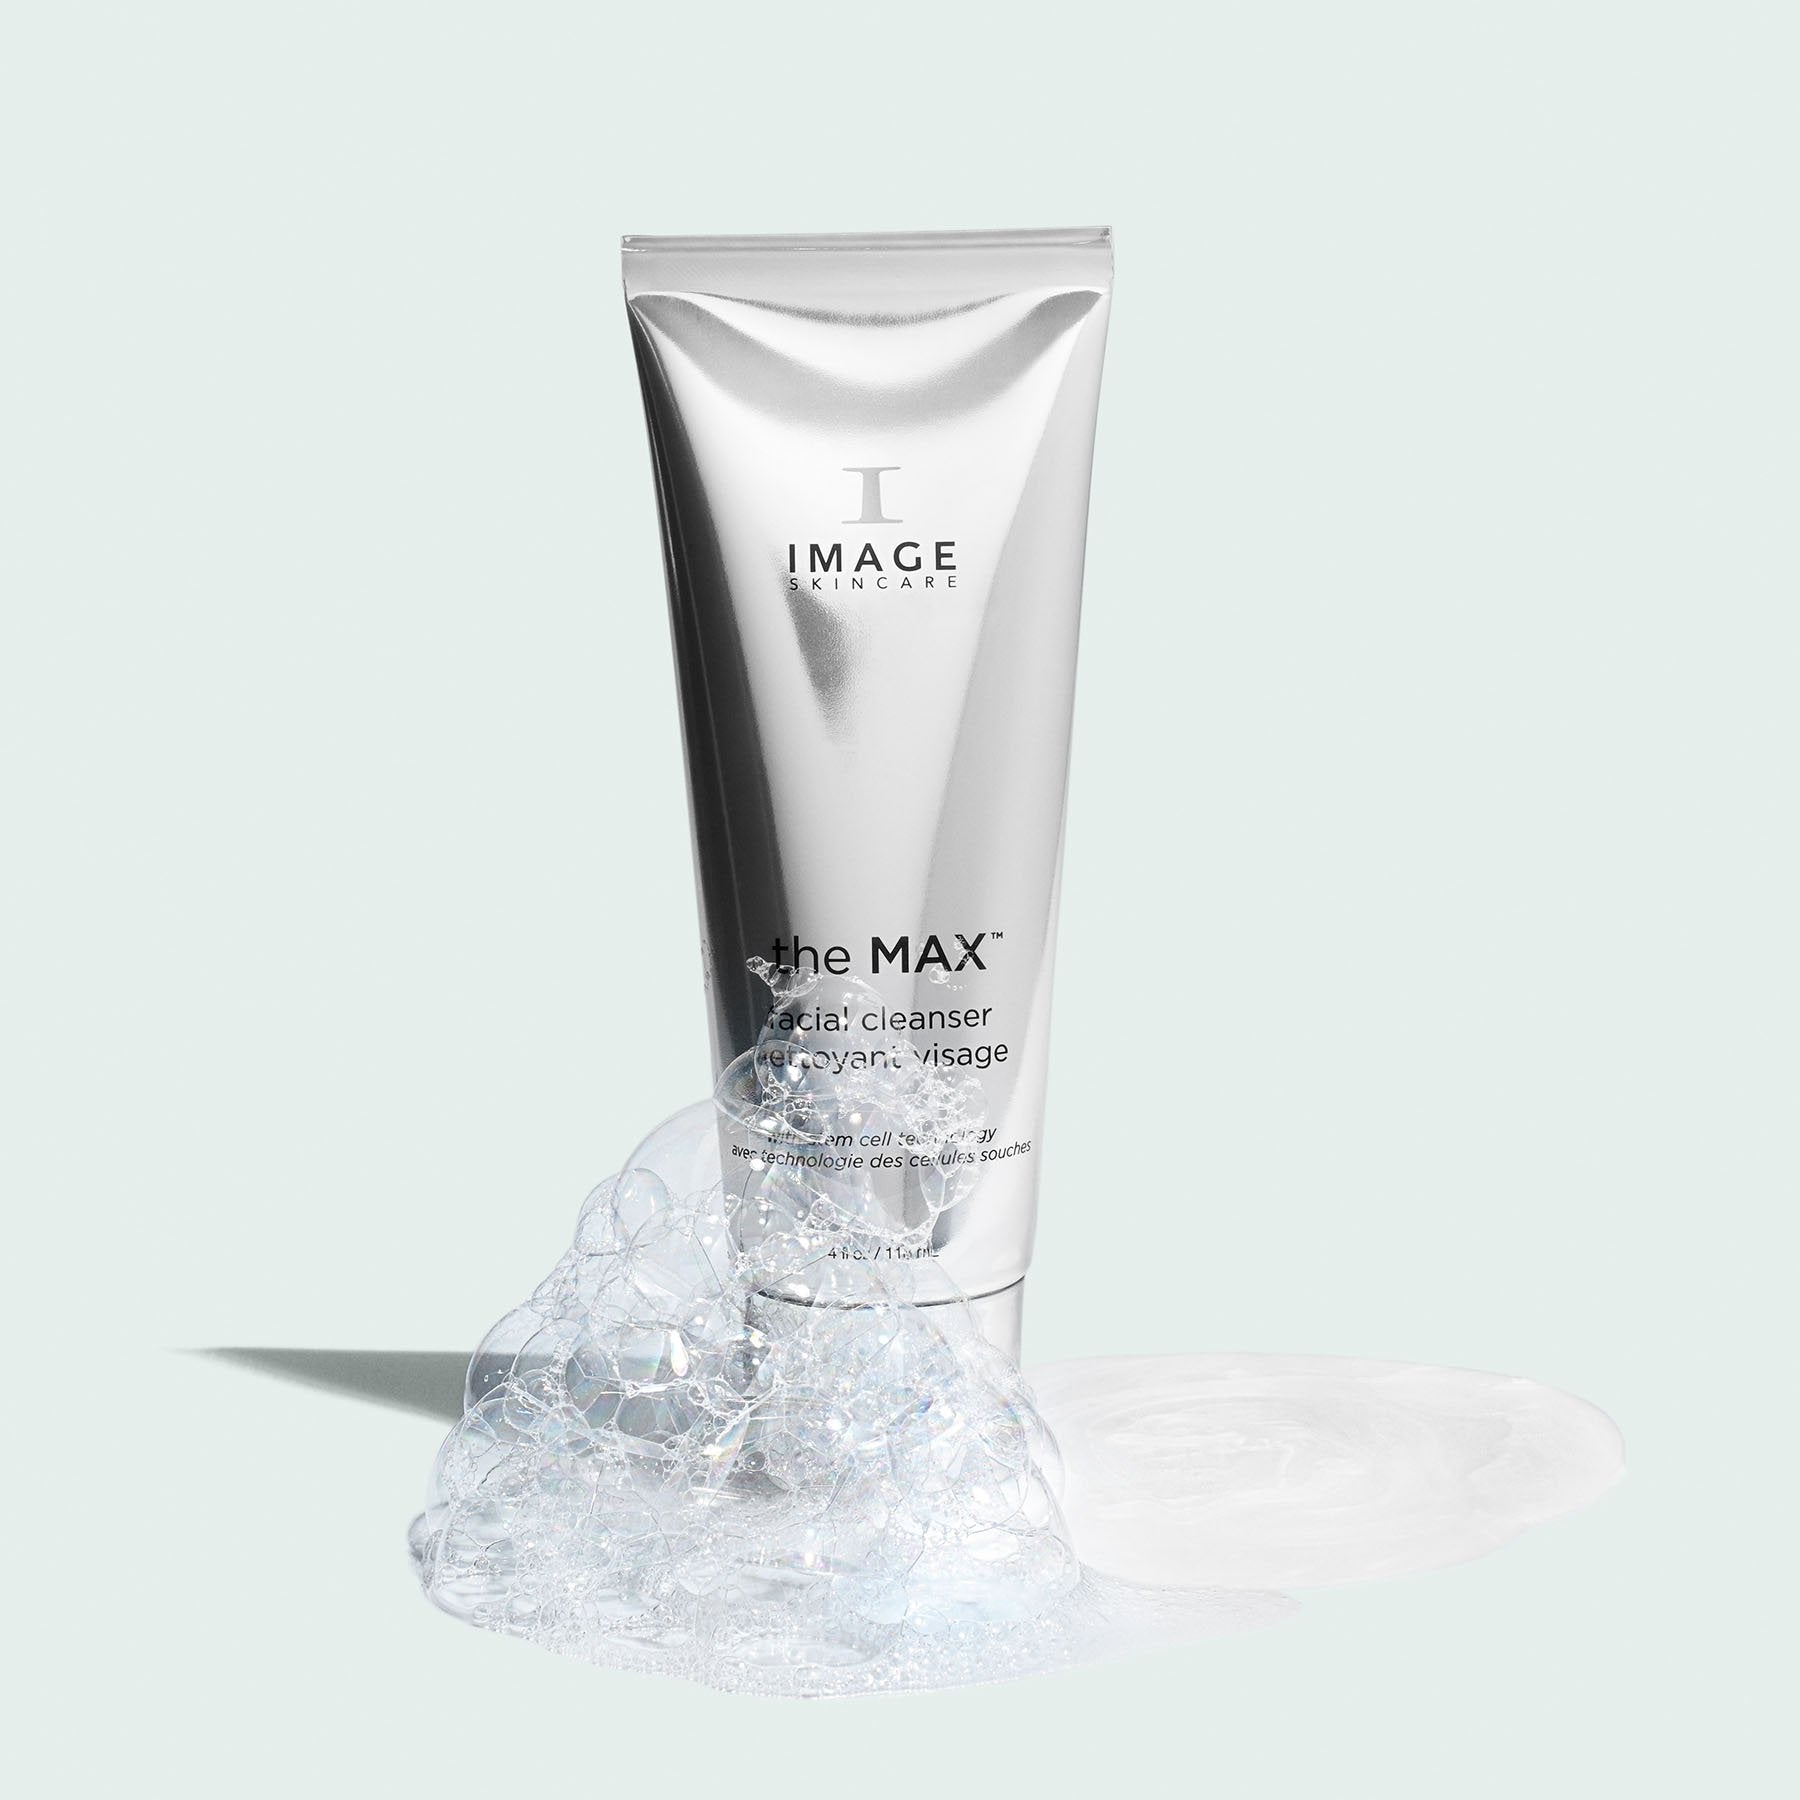 the MAX™ facial cleanser | IMAGE Skincare